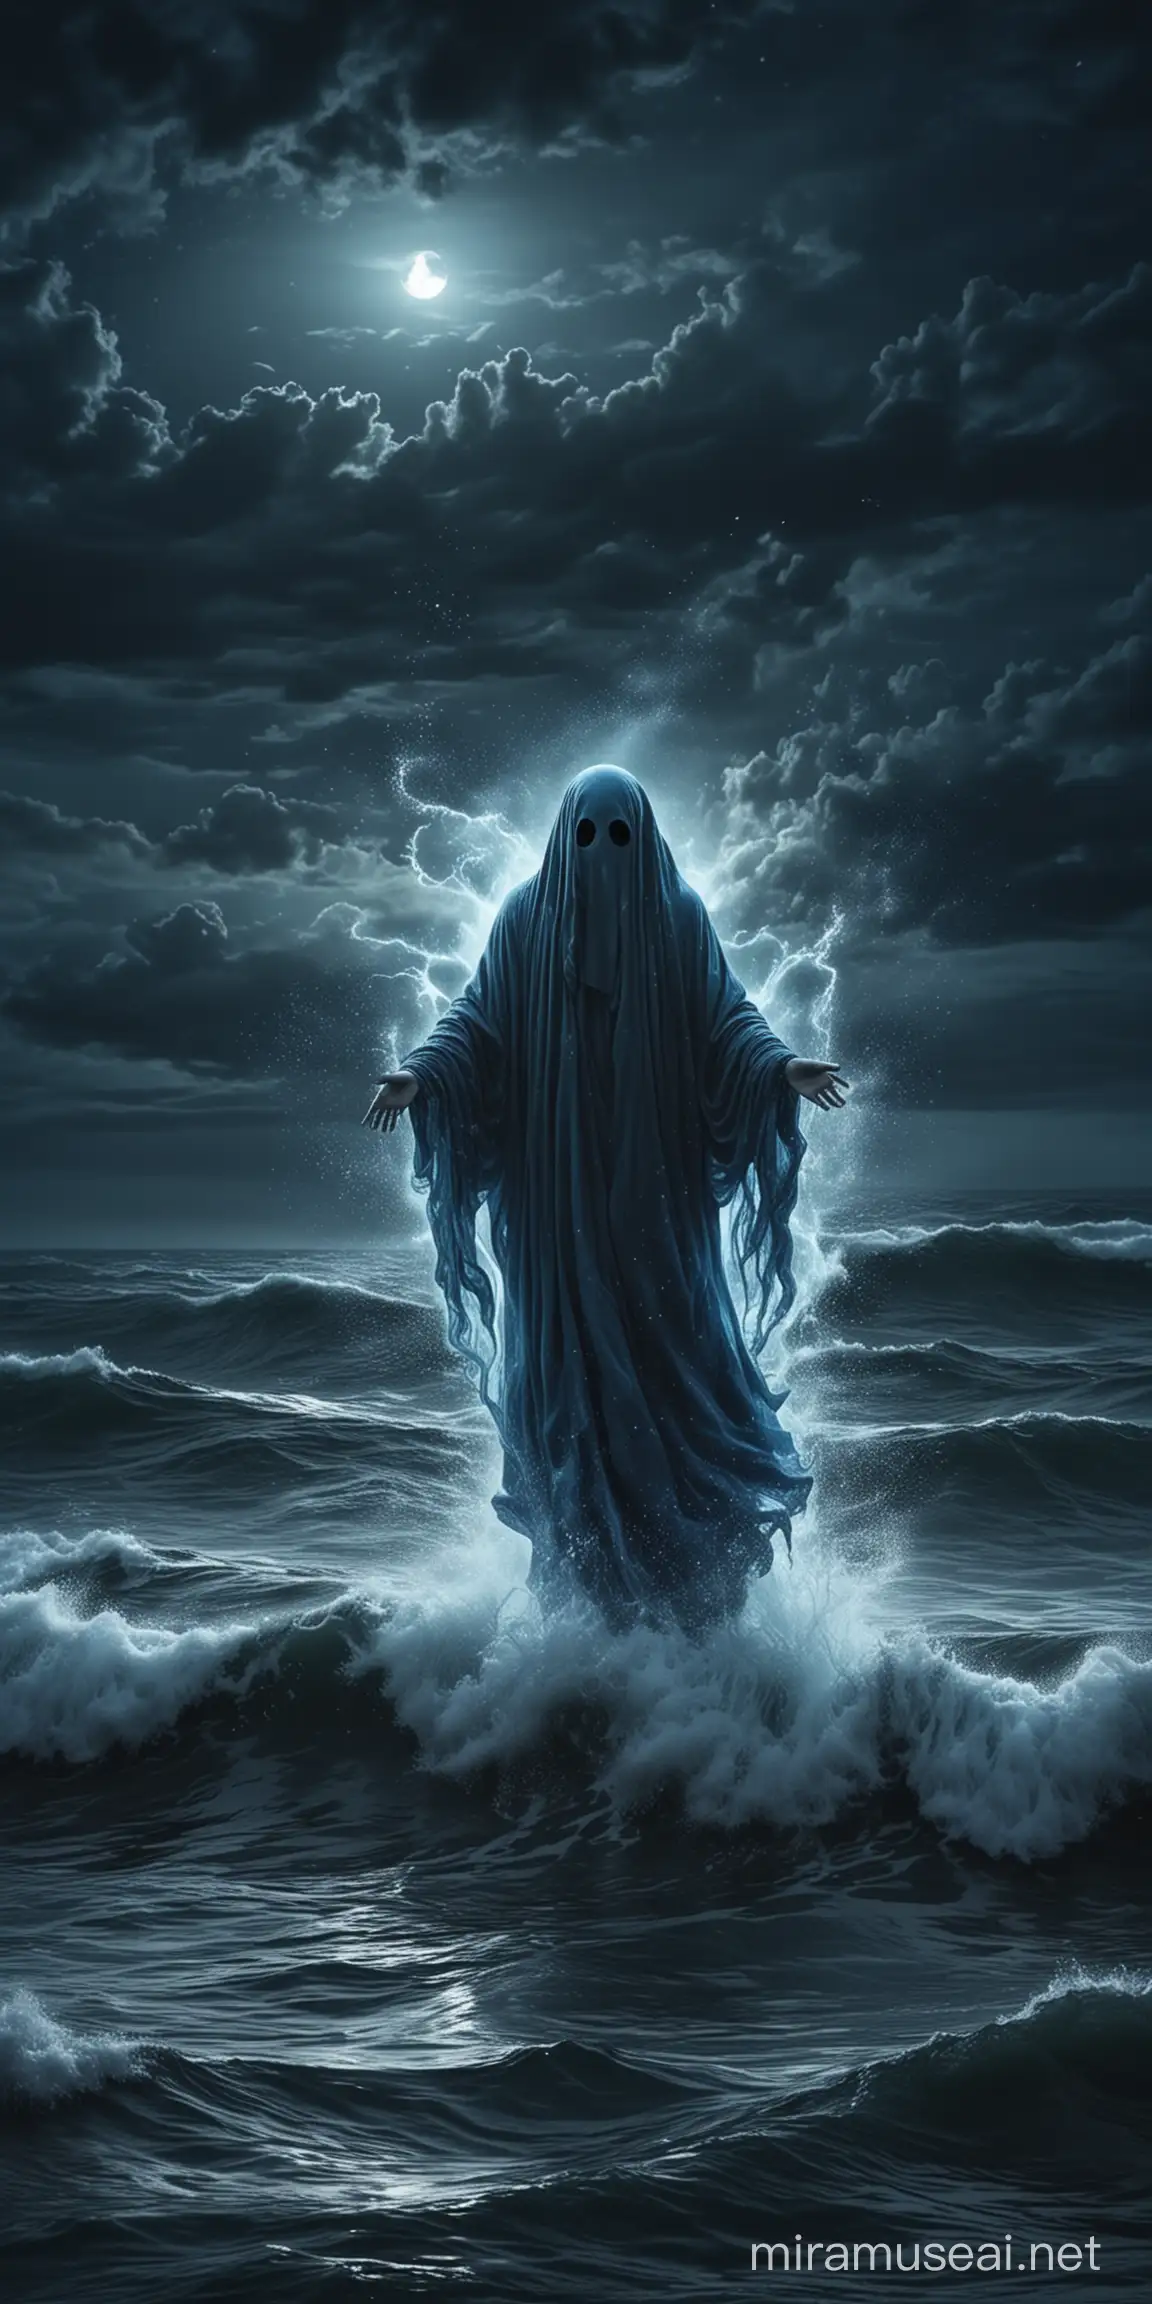 Ethereal Ghost Soars Above Stormy Midnight Seascape